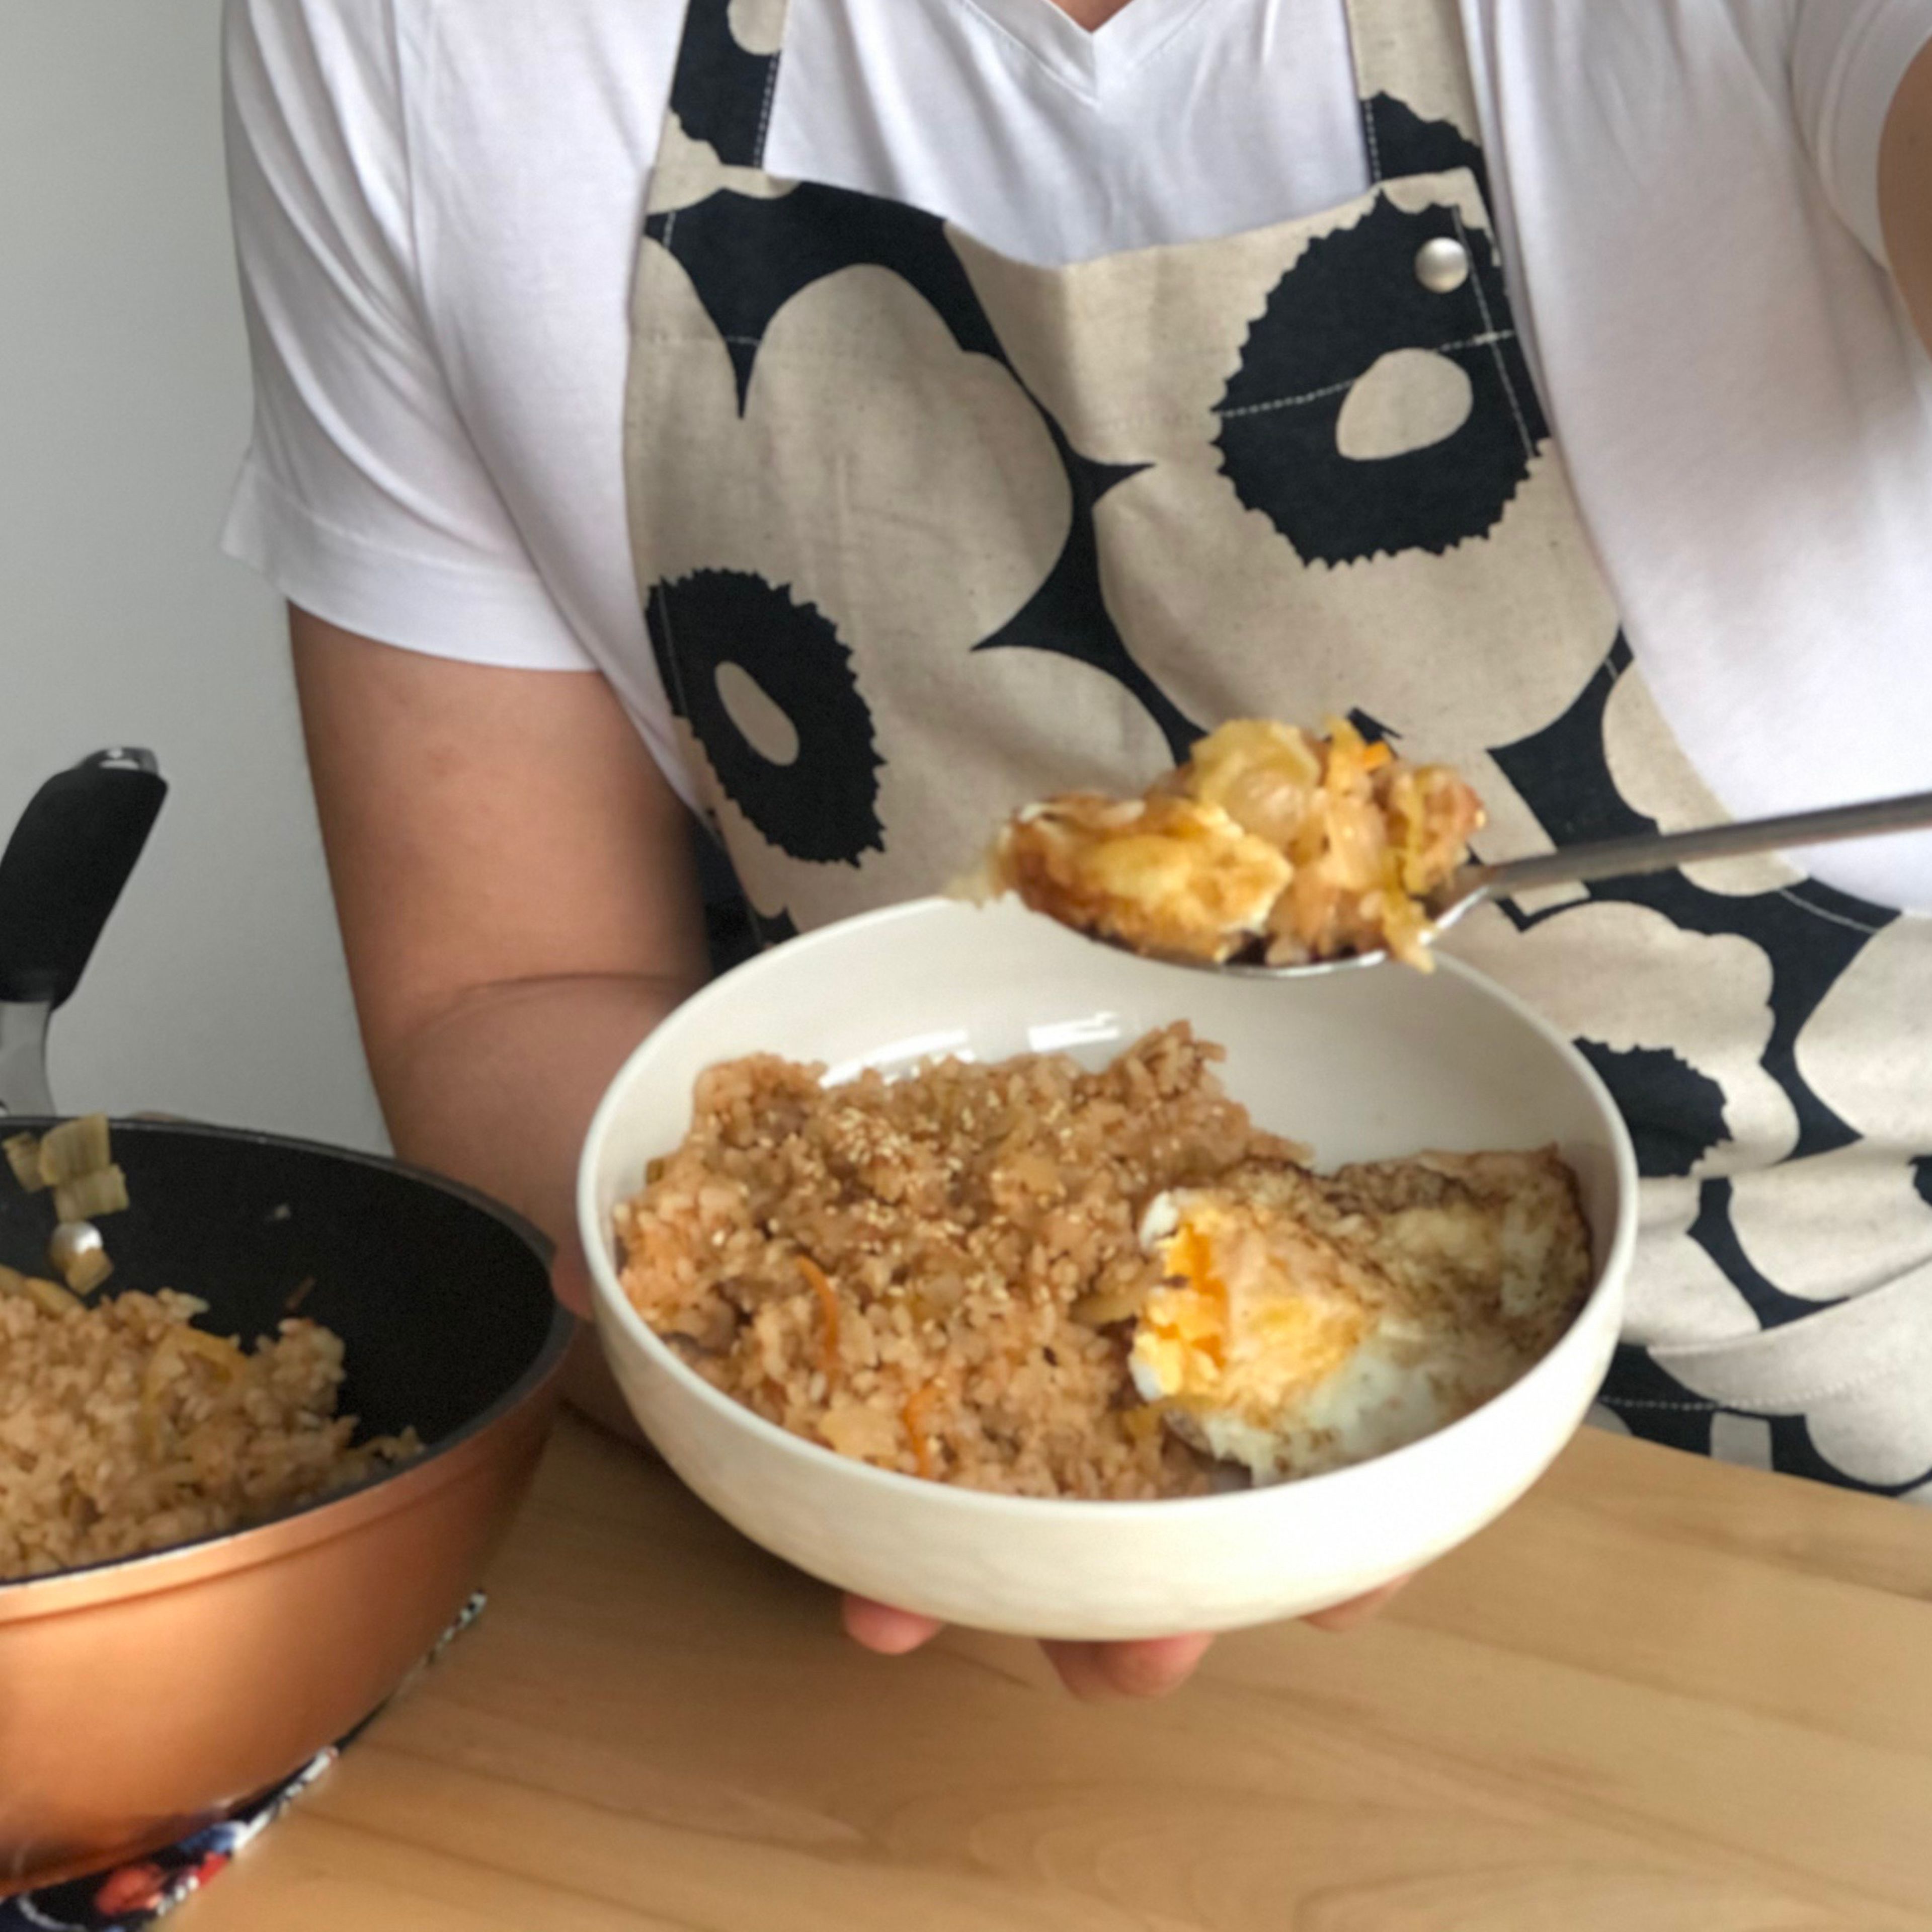 To top off the kimchi fried rice, I like to add toasted sesame seeds, roasted seaweed, and a fried egg on top (one per serving). Hope you all enjoyed this recipe!